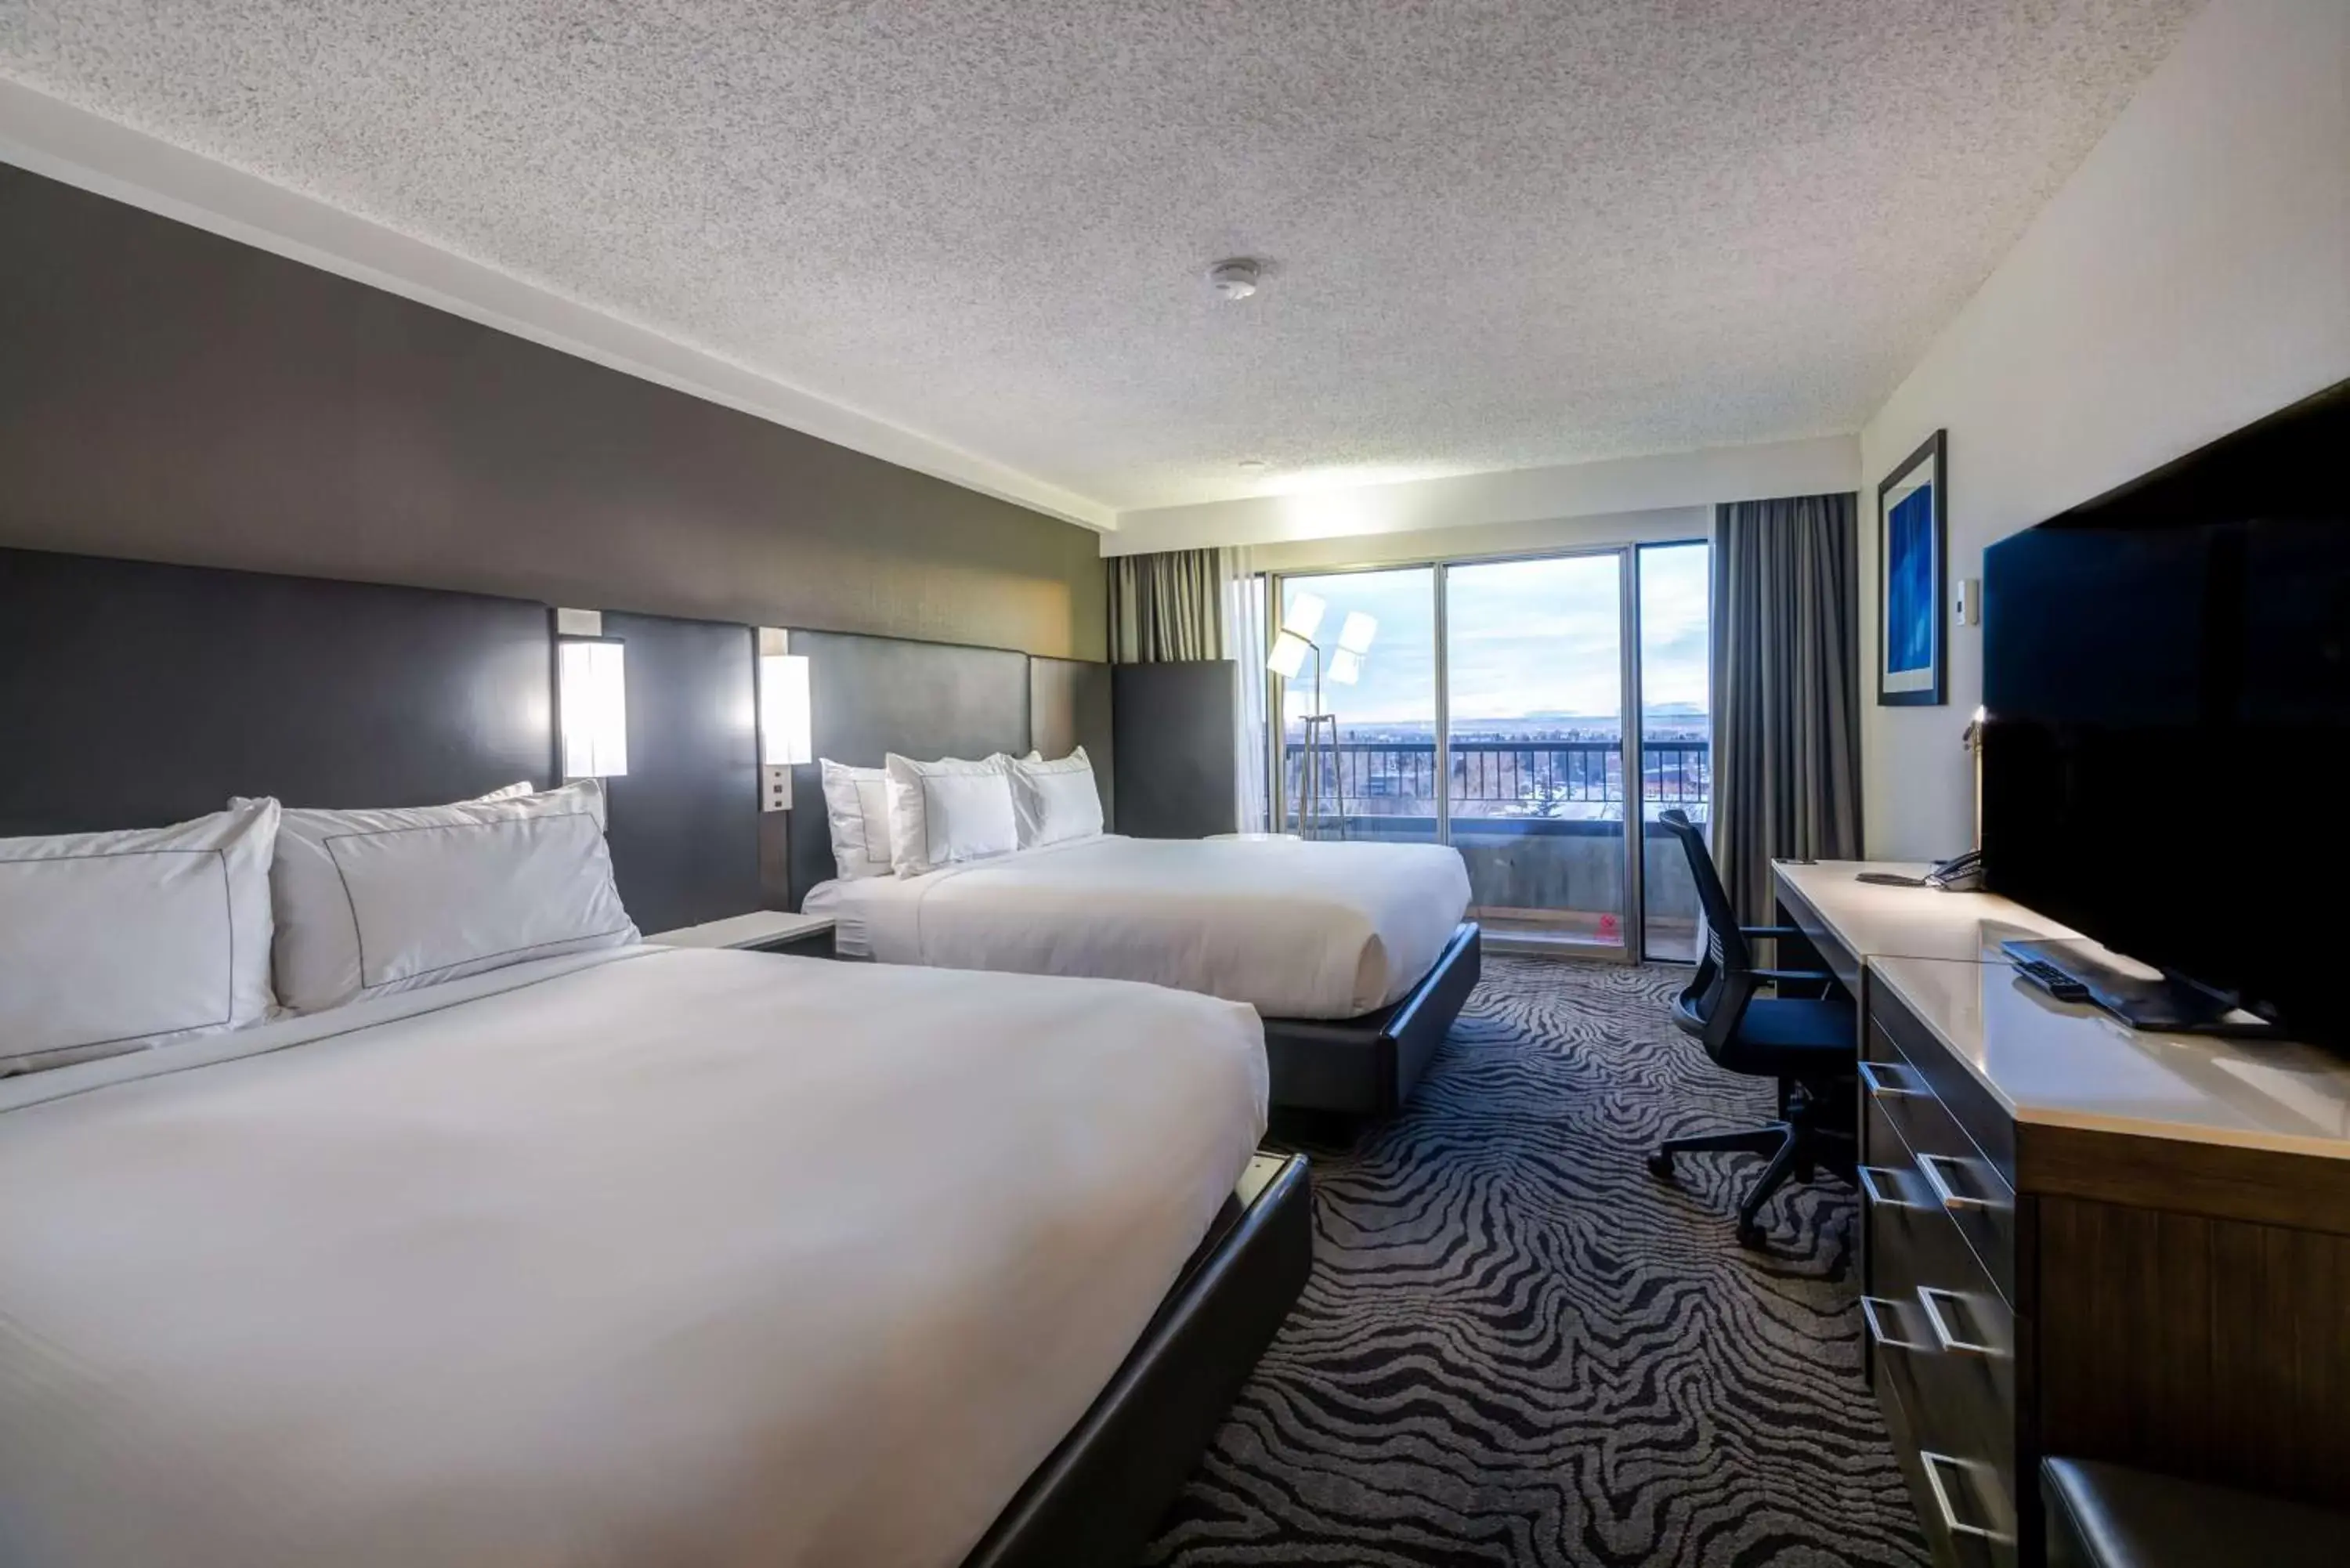 Bedroom in DoubleTree by Hilton Calgary North